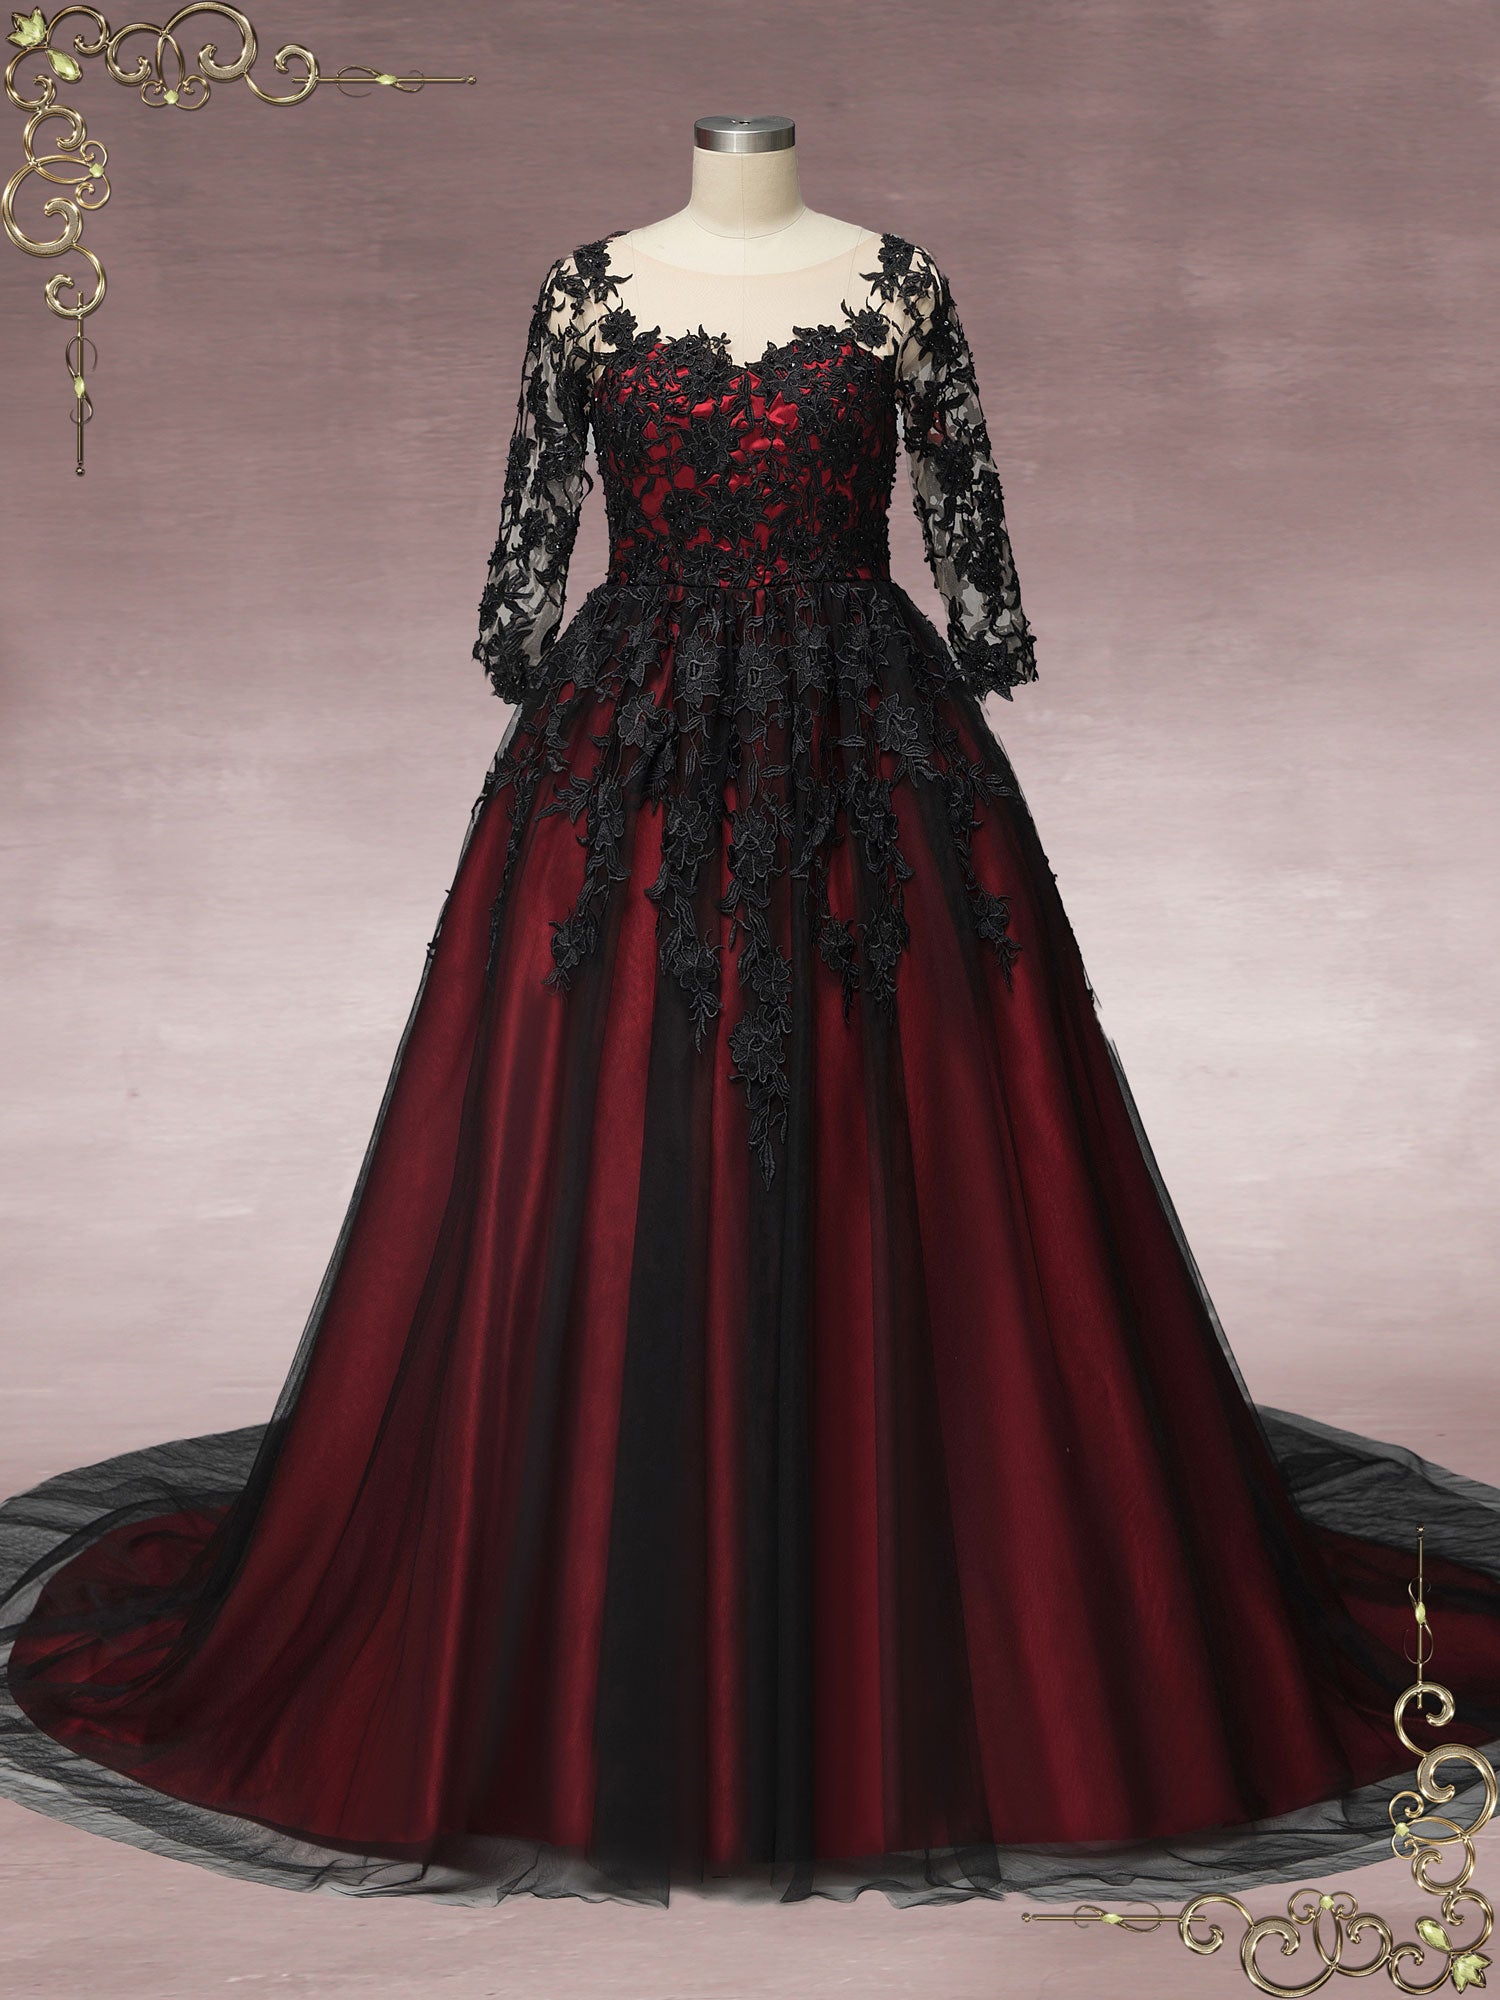 red and black wedding dress